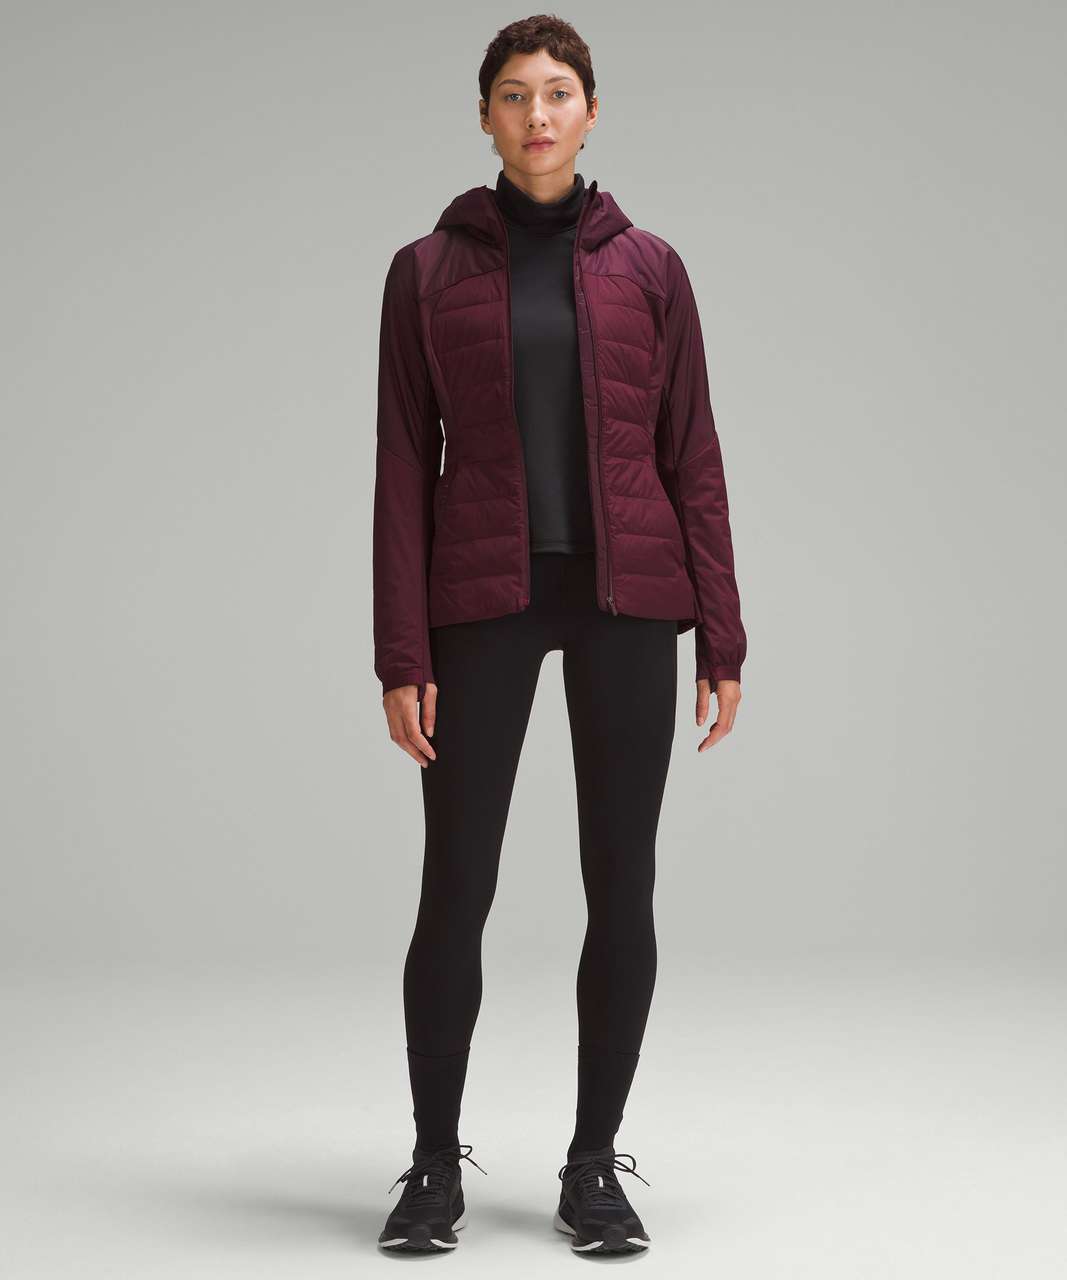 Lululemon Down for It All Jacket - Cassis